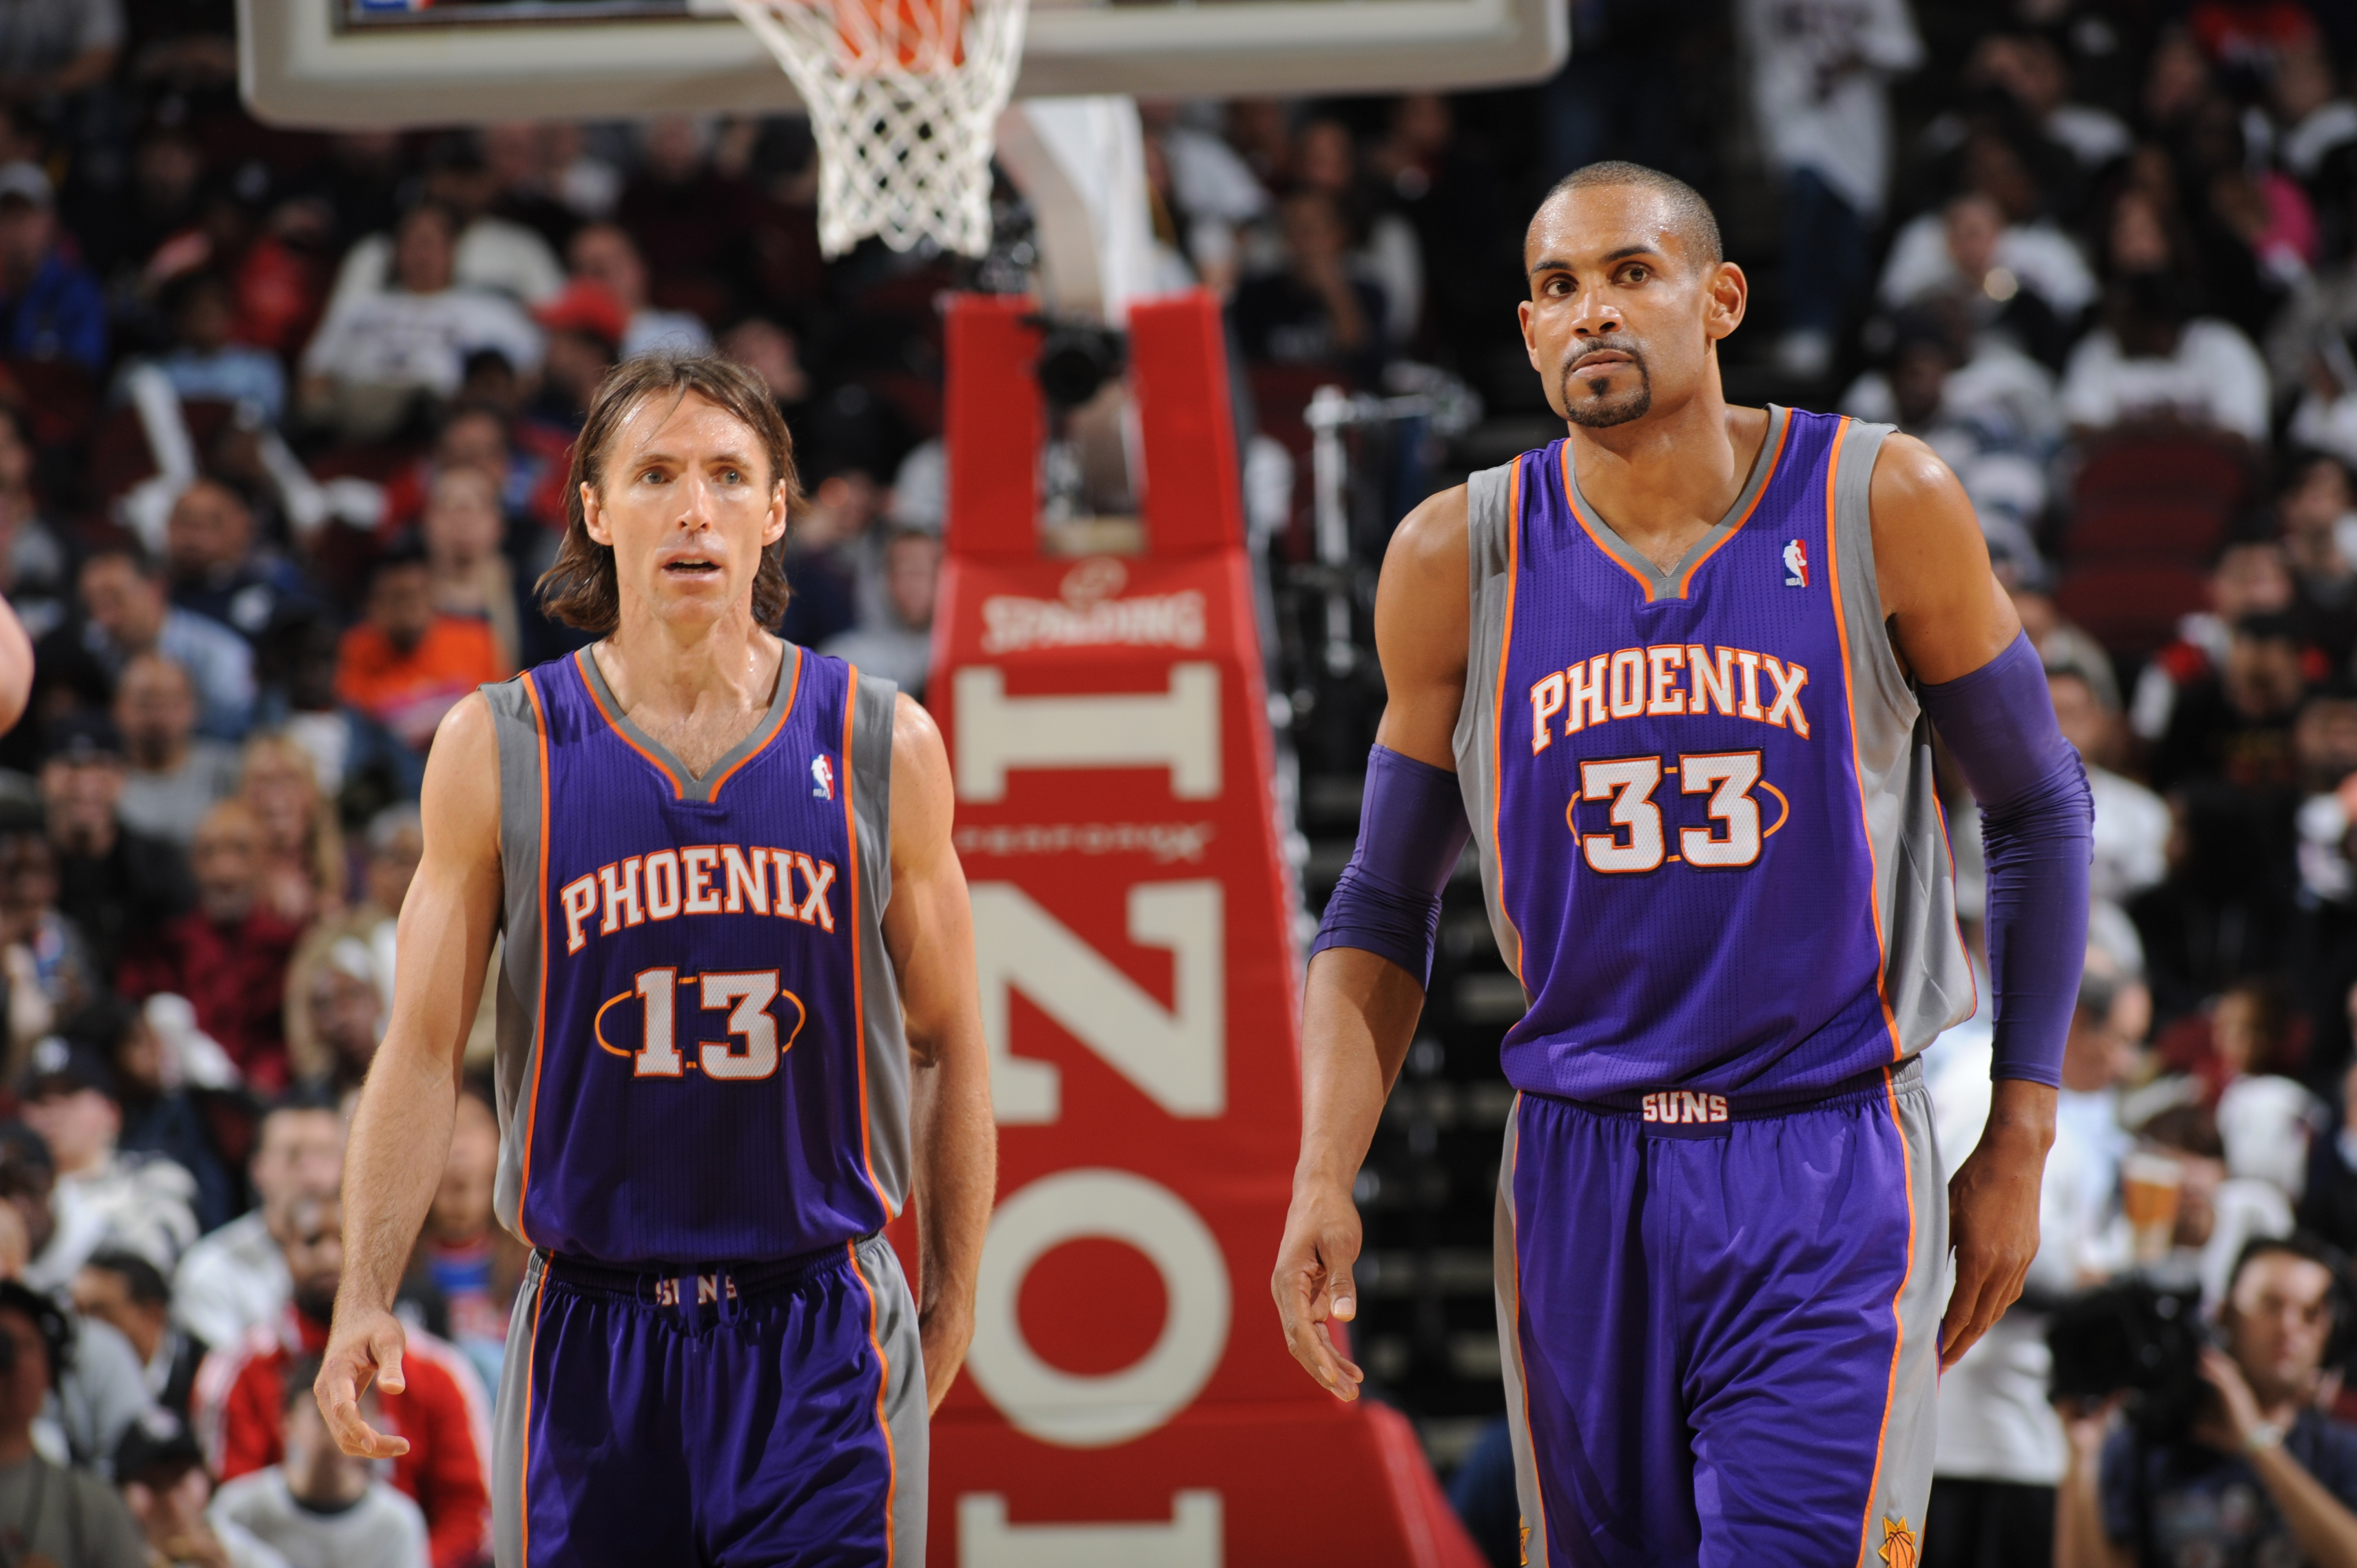 Detroit Pistons: Should Grant Hill's number be retired?